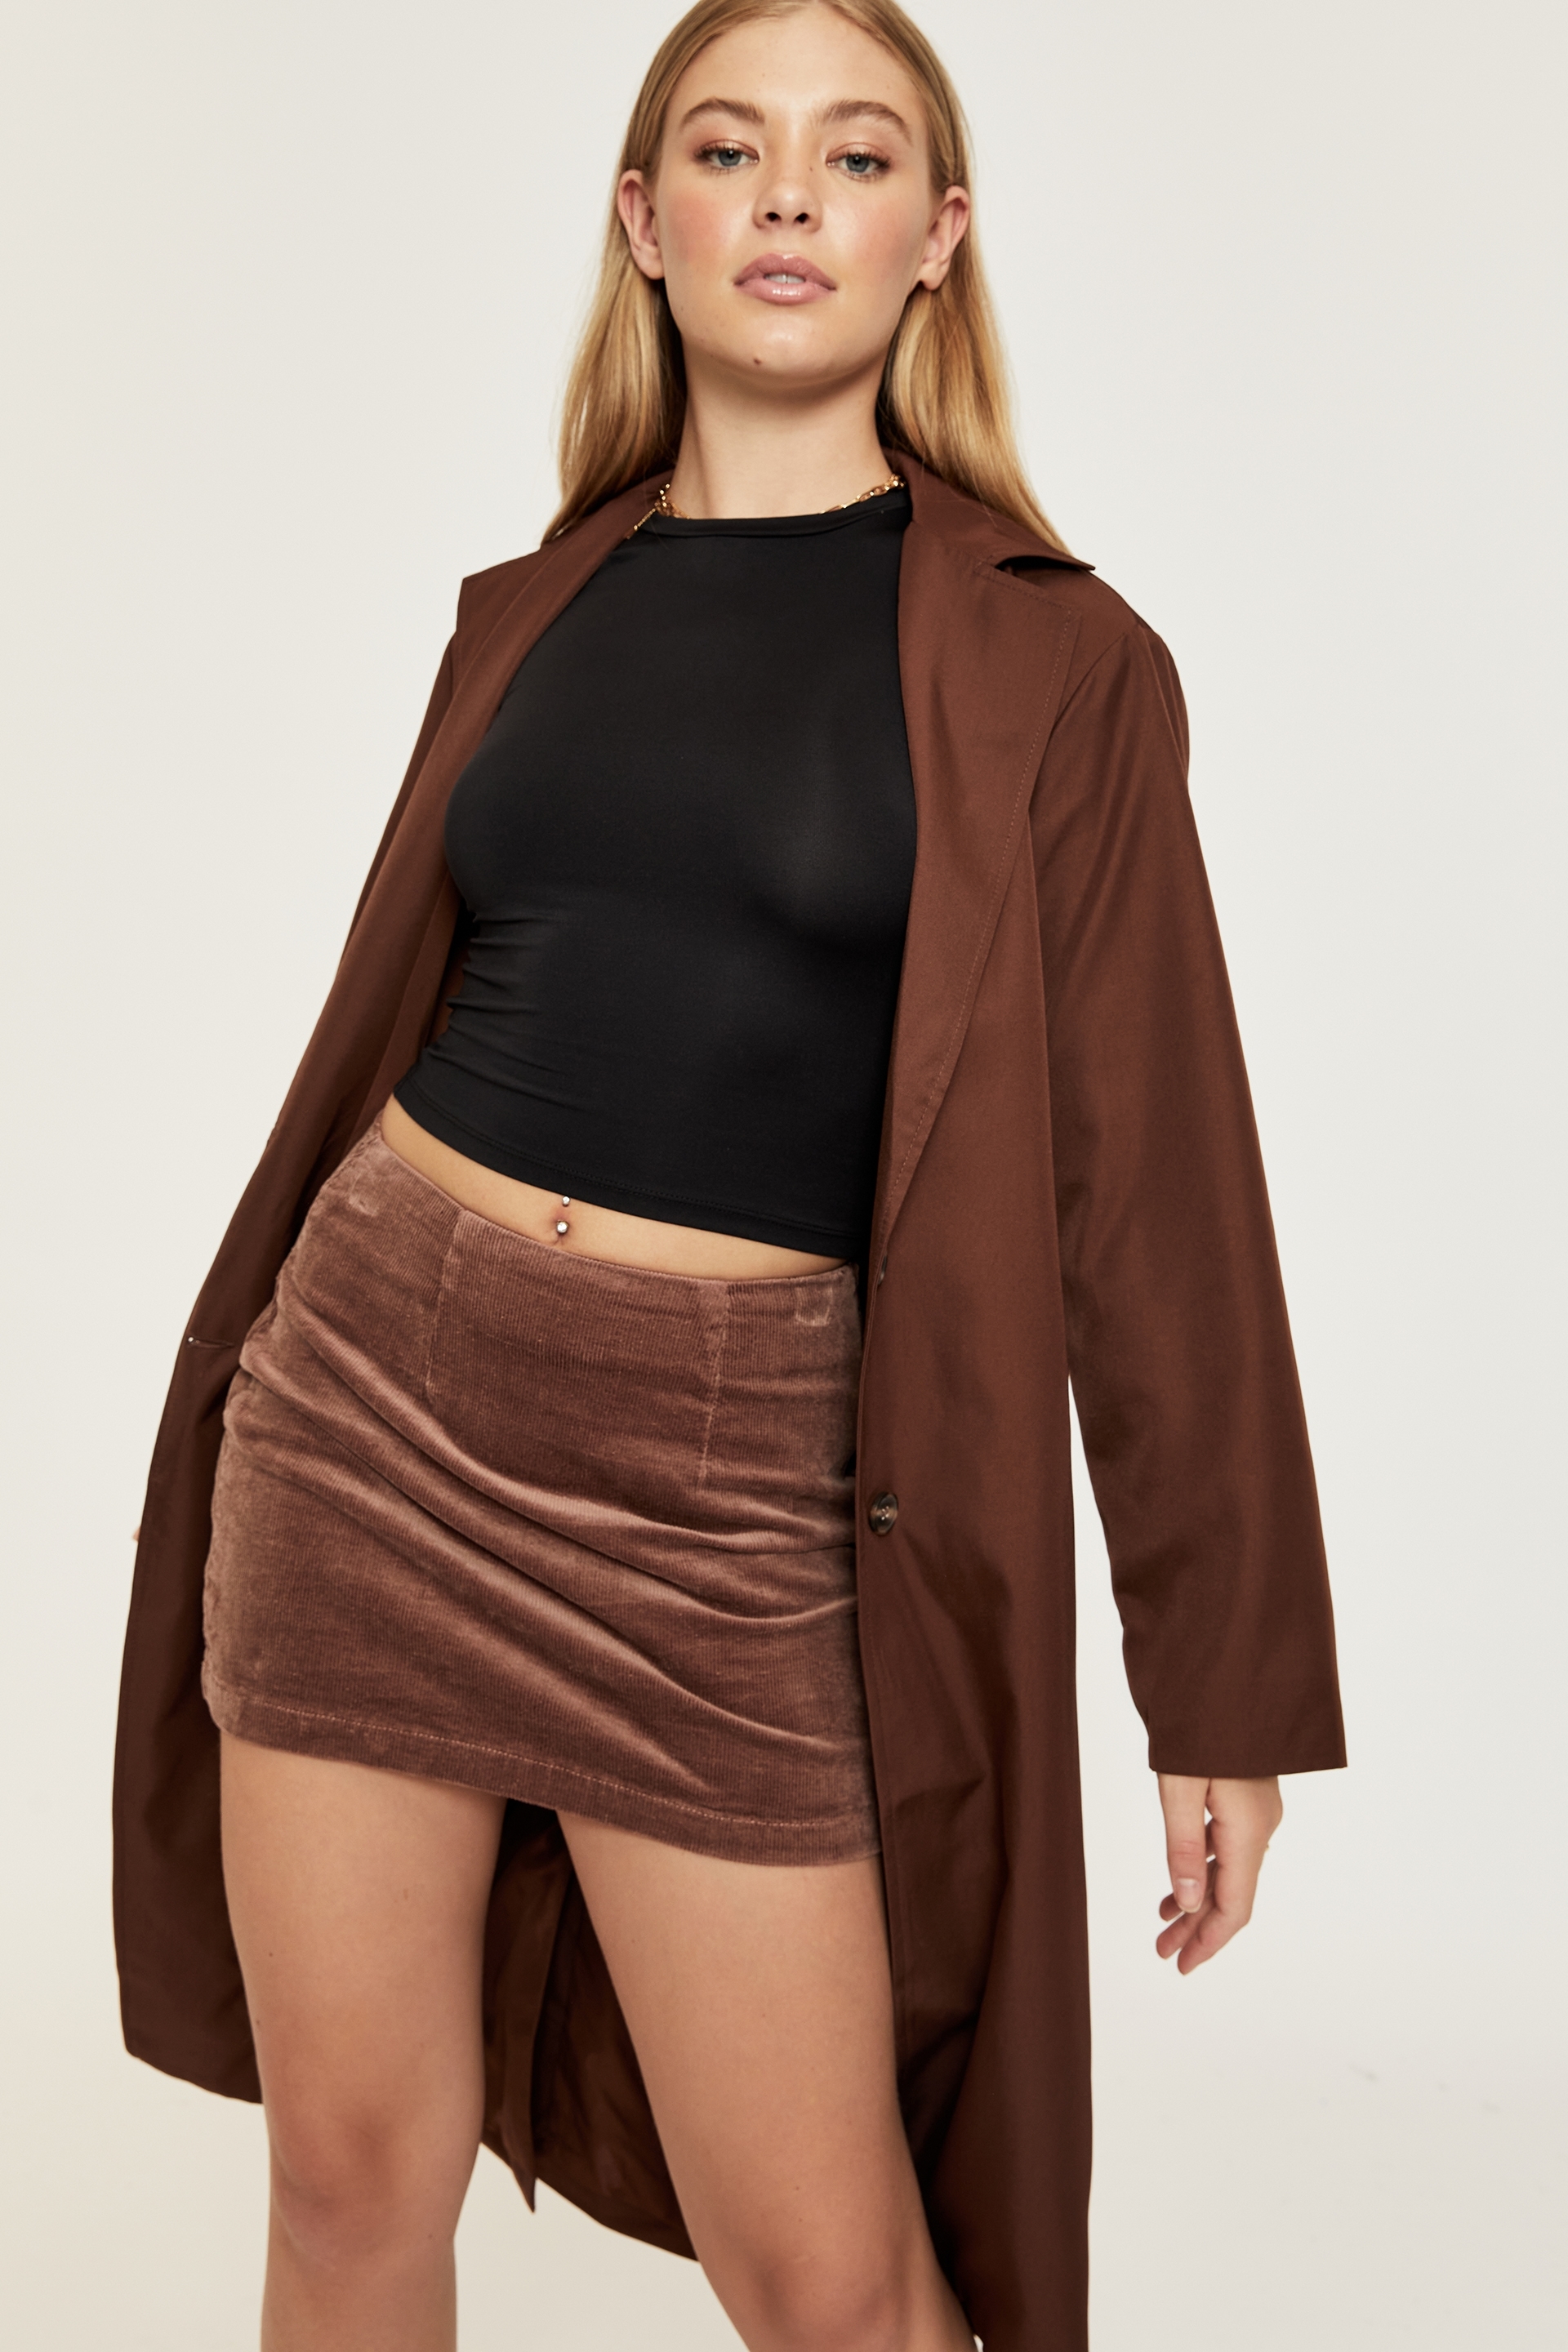 Supré - Penelope Trench Coat - Choc top